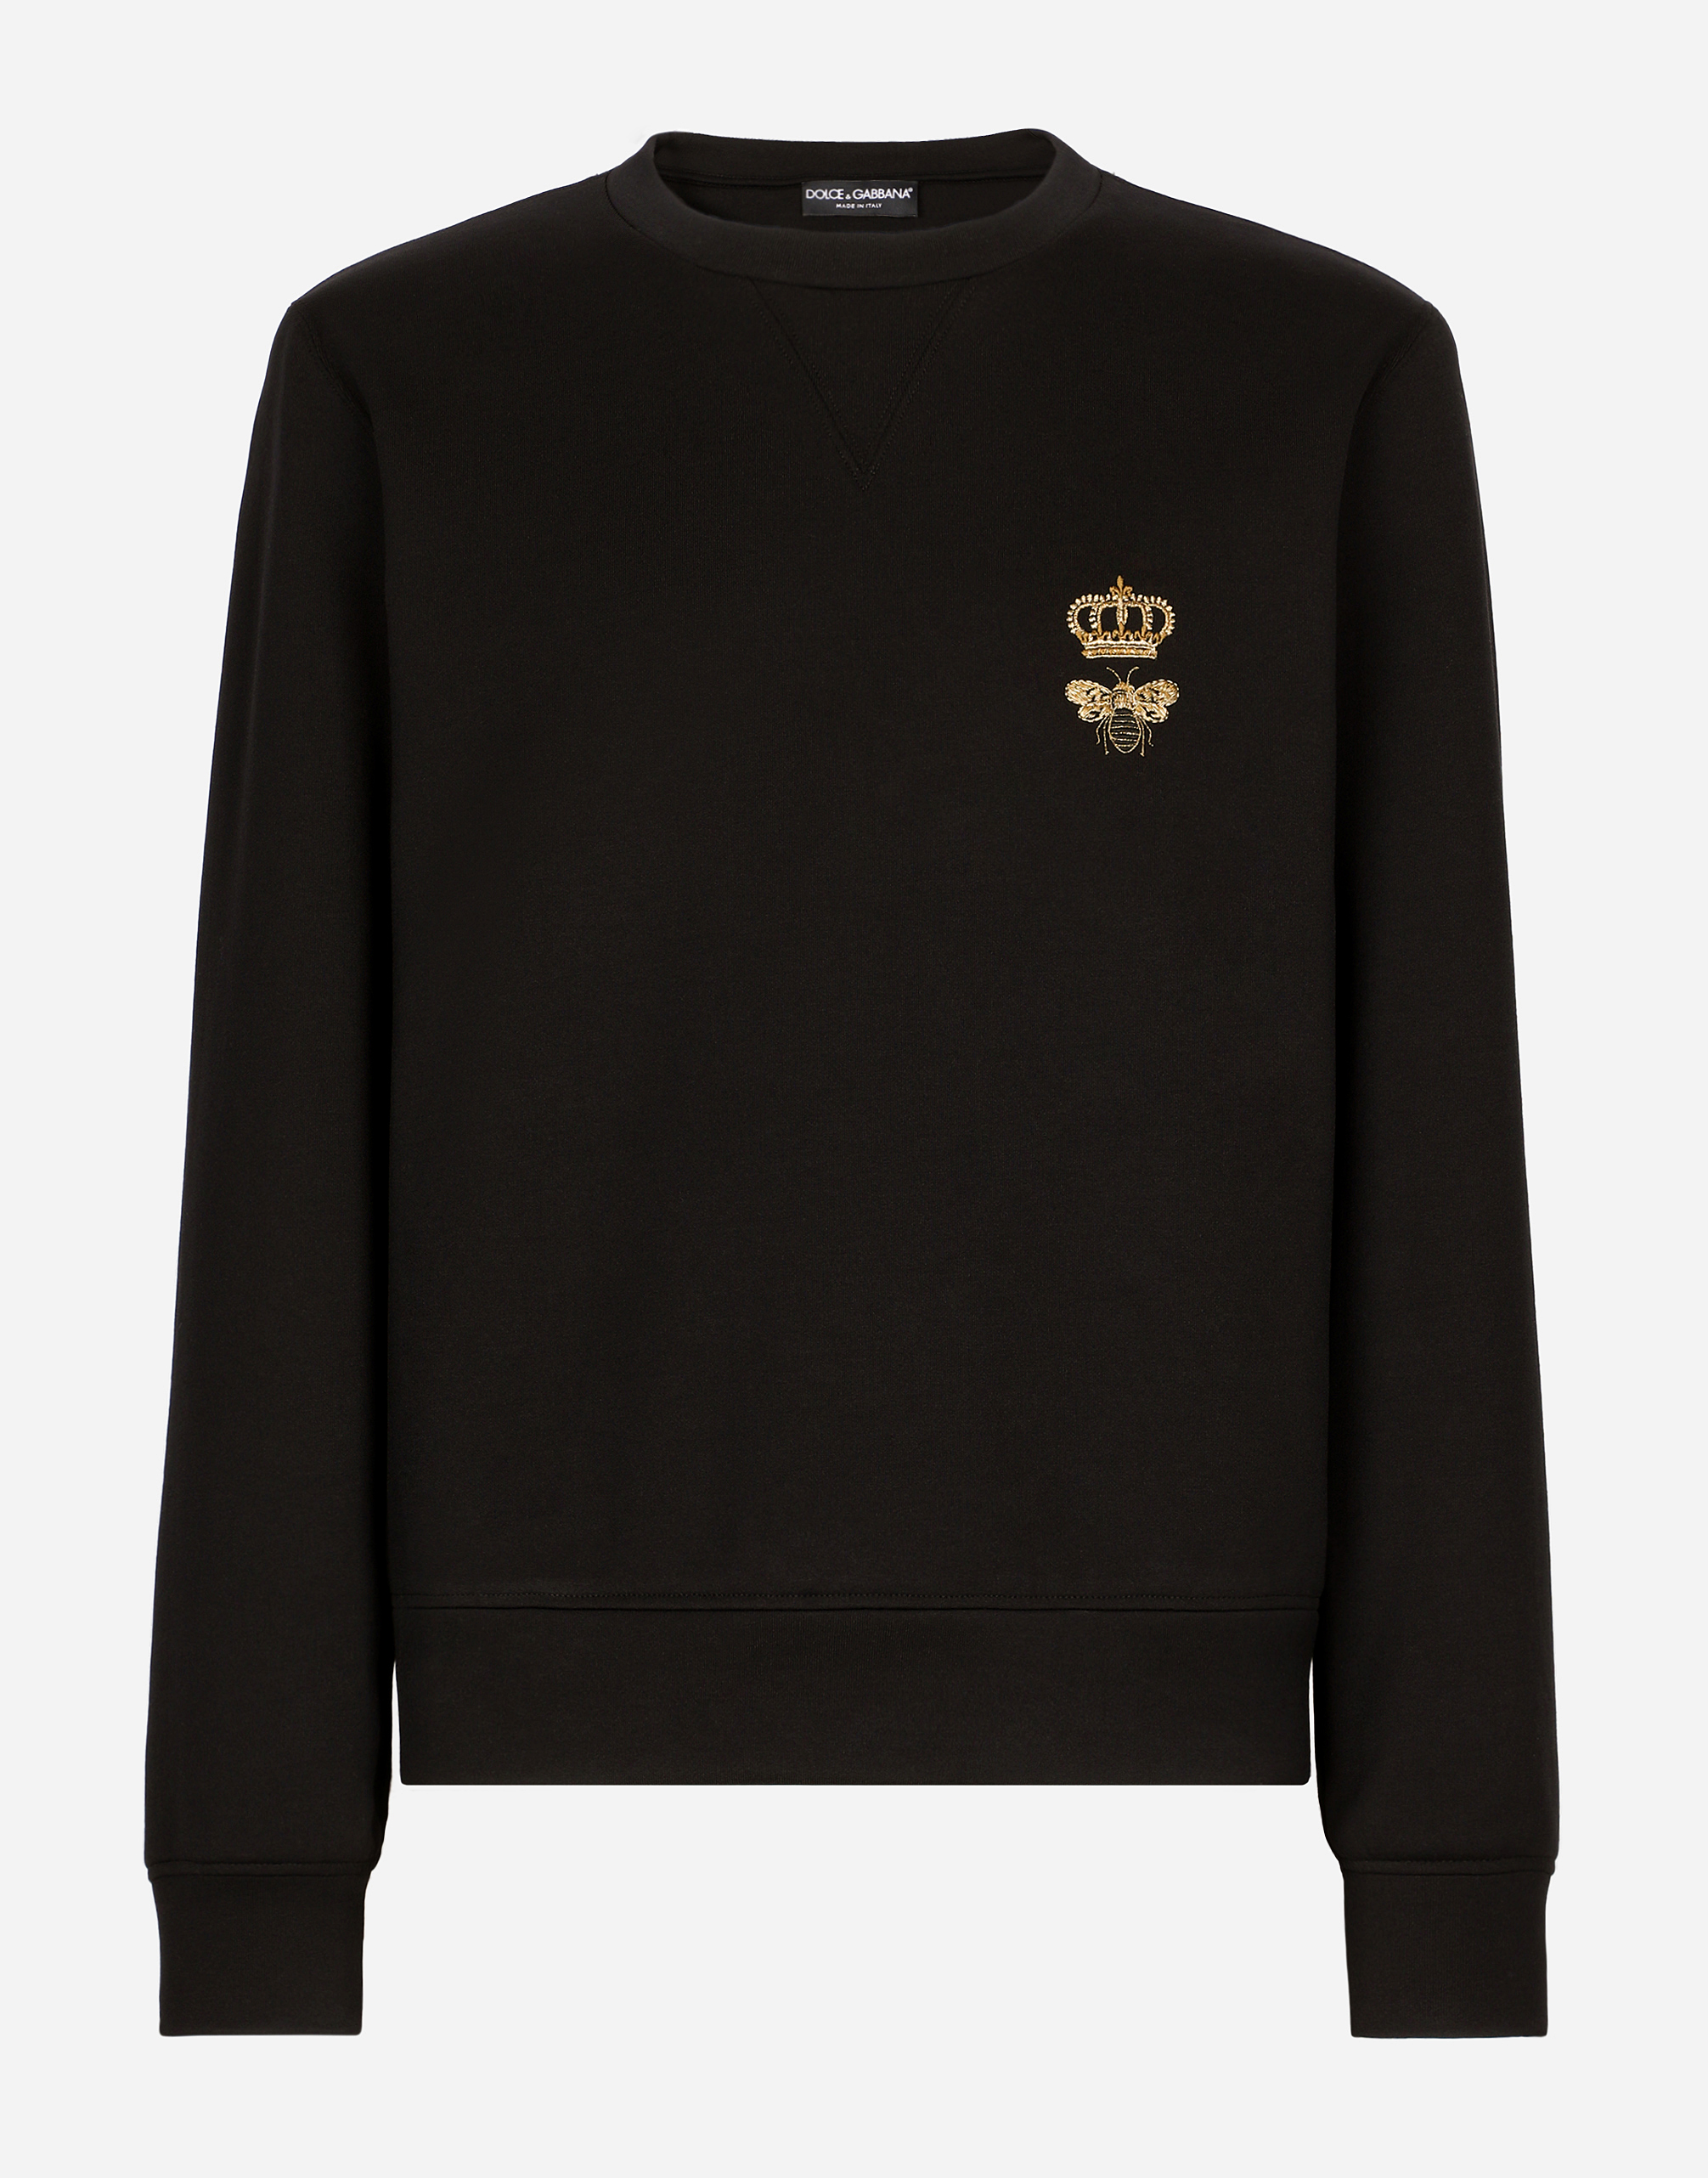 Dolce & Gabbana Cotton Jersey Sweatshirt With Embroidery In Black